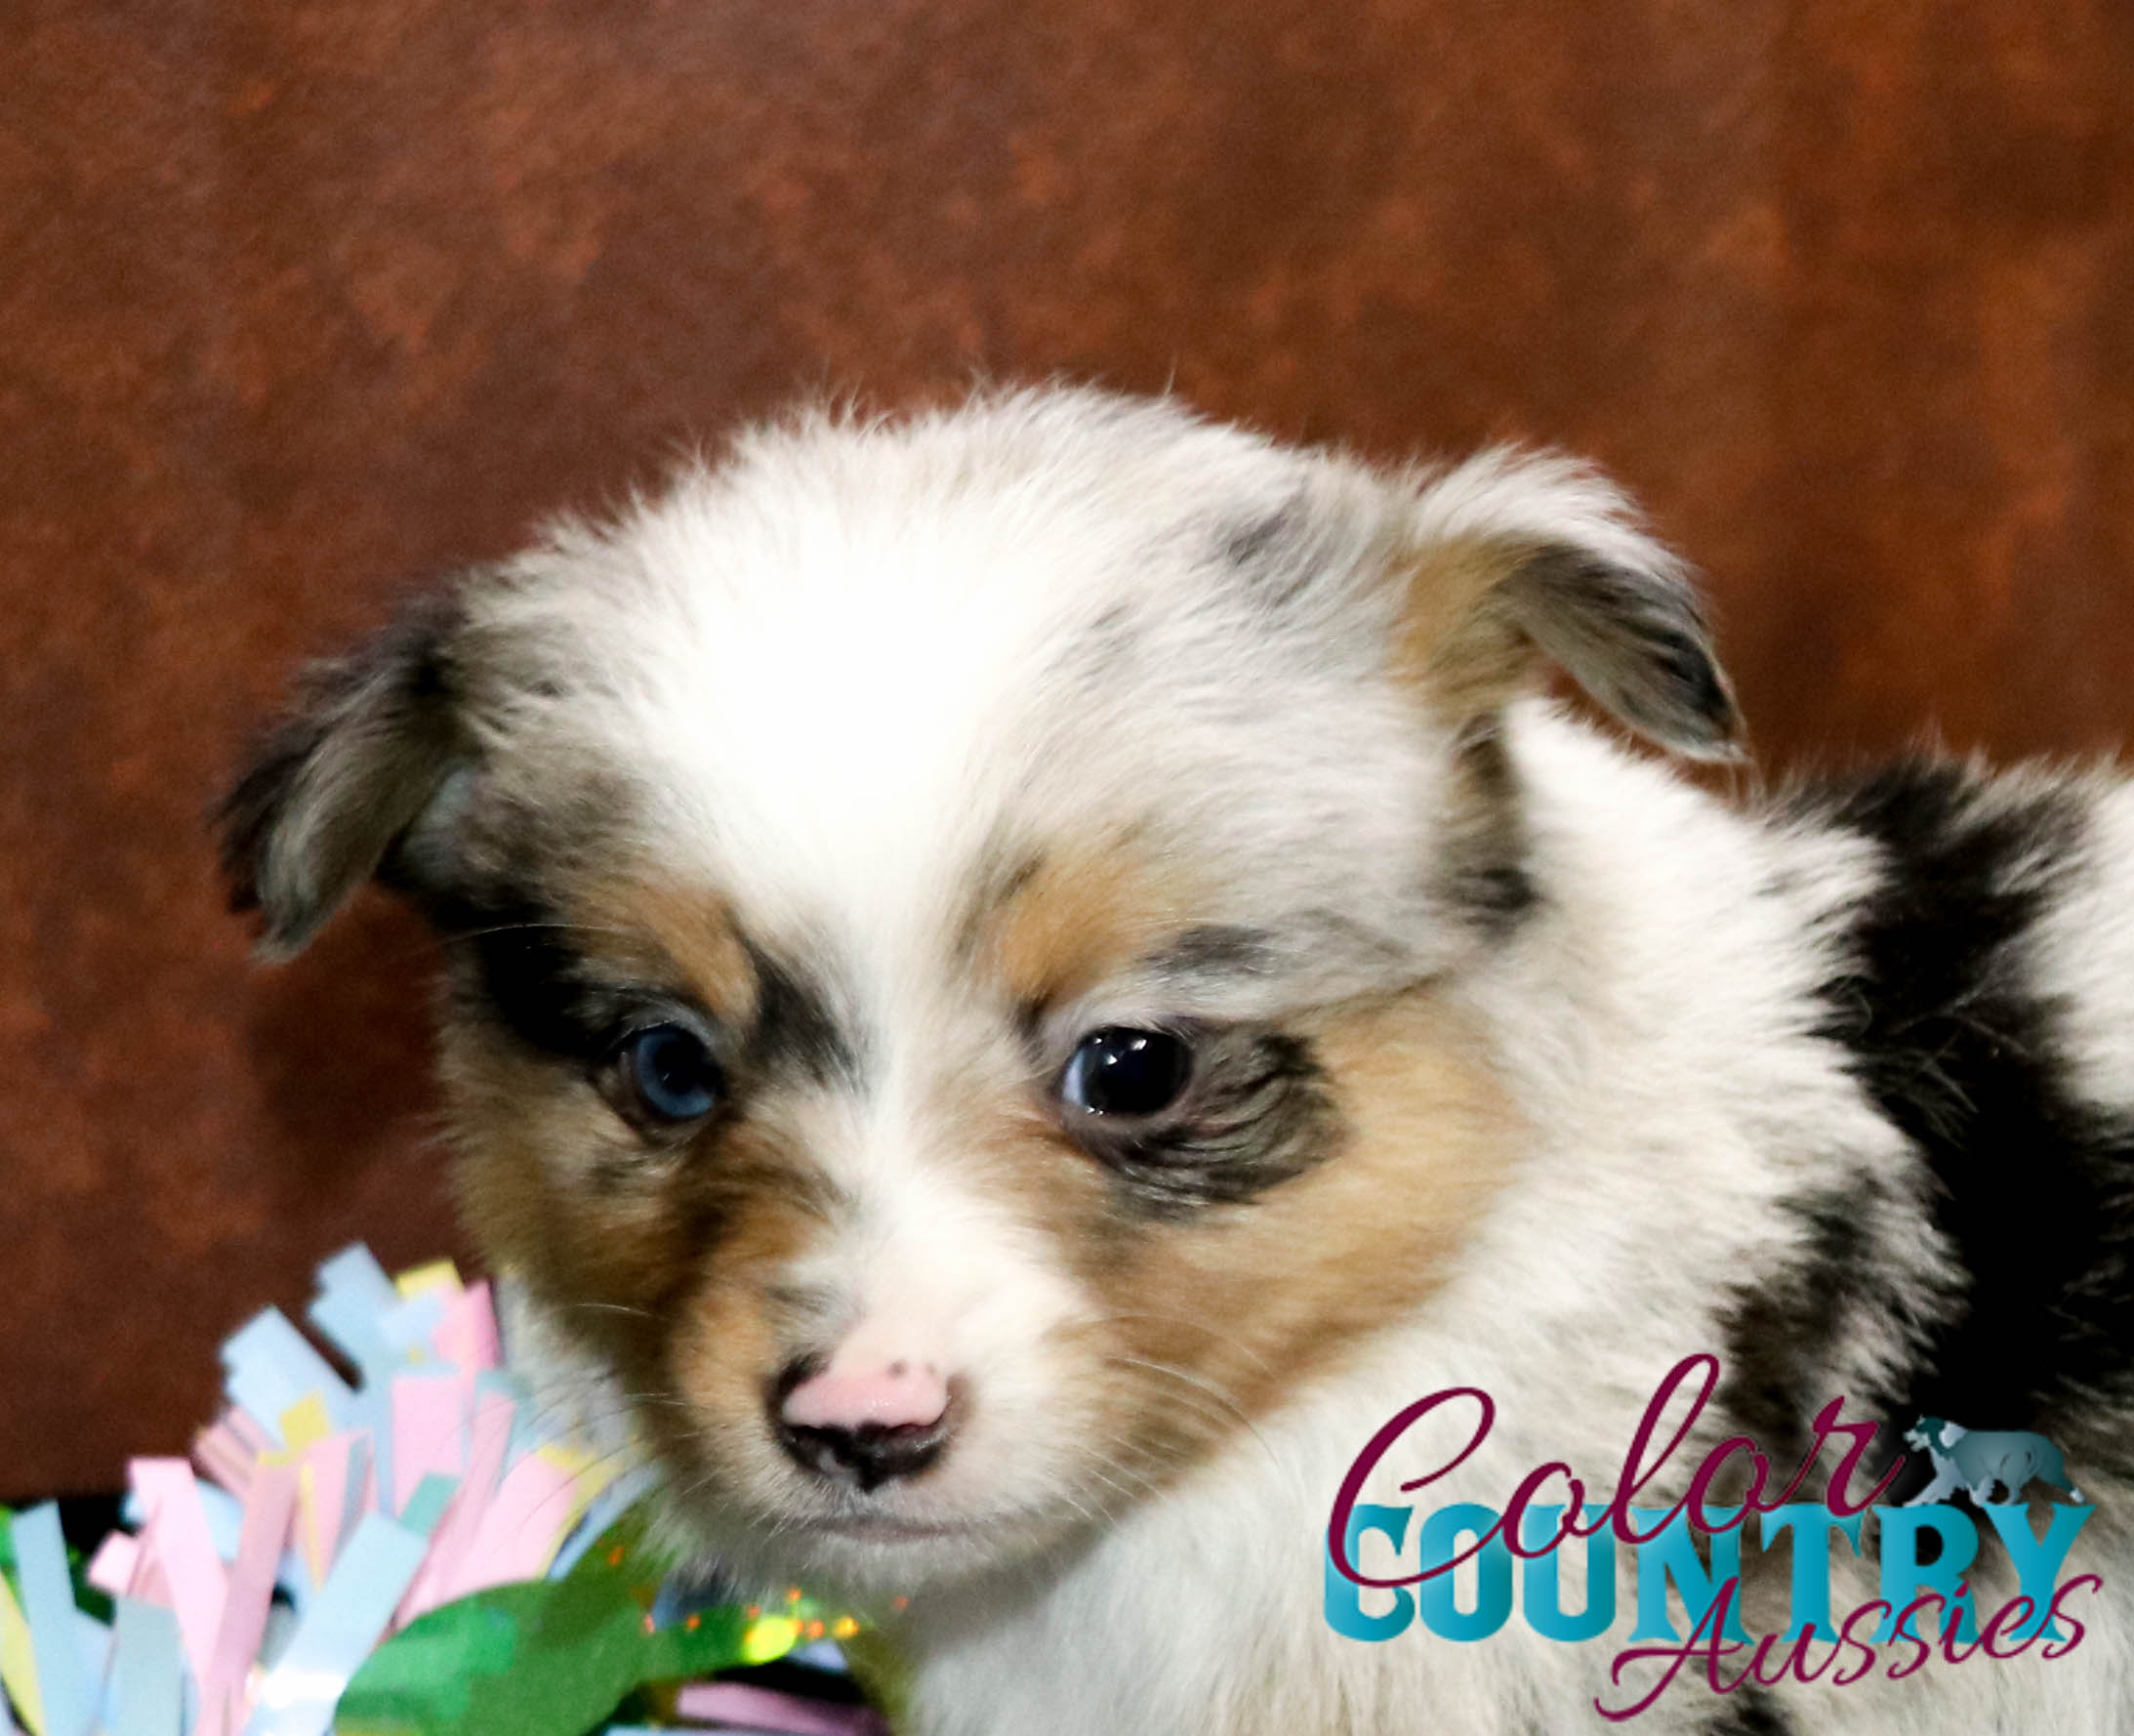 https://colorcountryaussies.com/wp-content/uploads/2021/03/Windys-Blue-merle-male-3-Blue-merle-toy-aussie-for-sale-Color-Country-Aussies-28.jpg